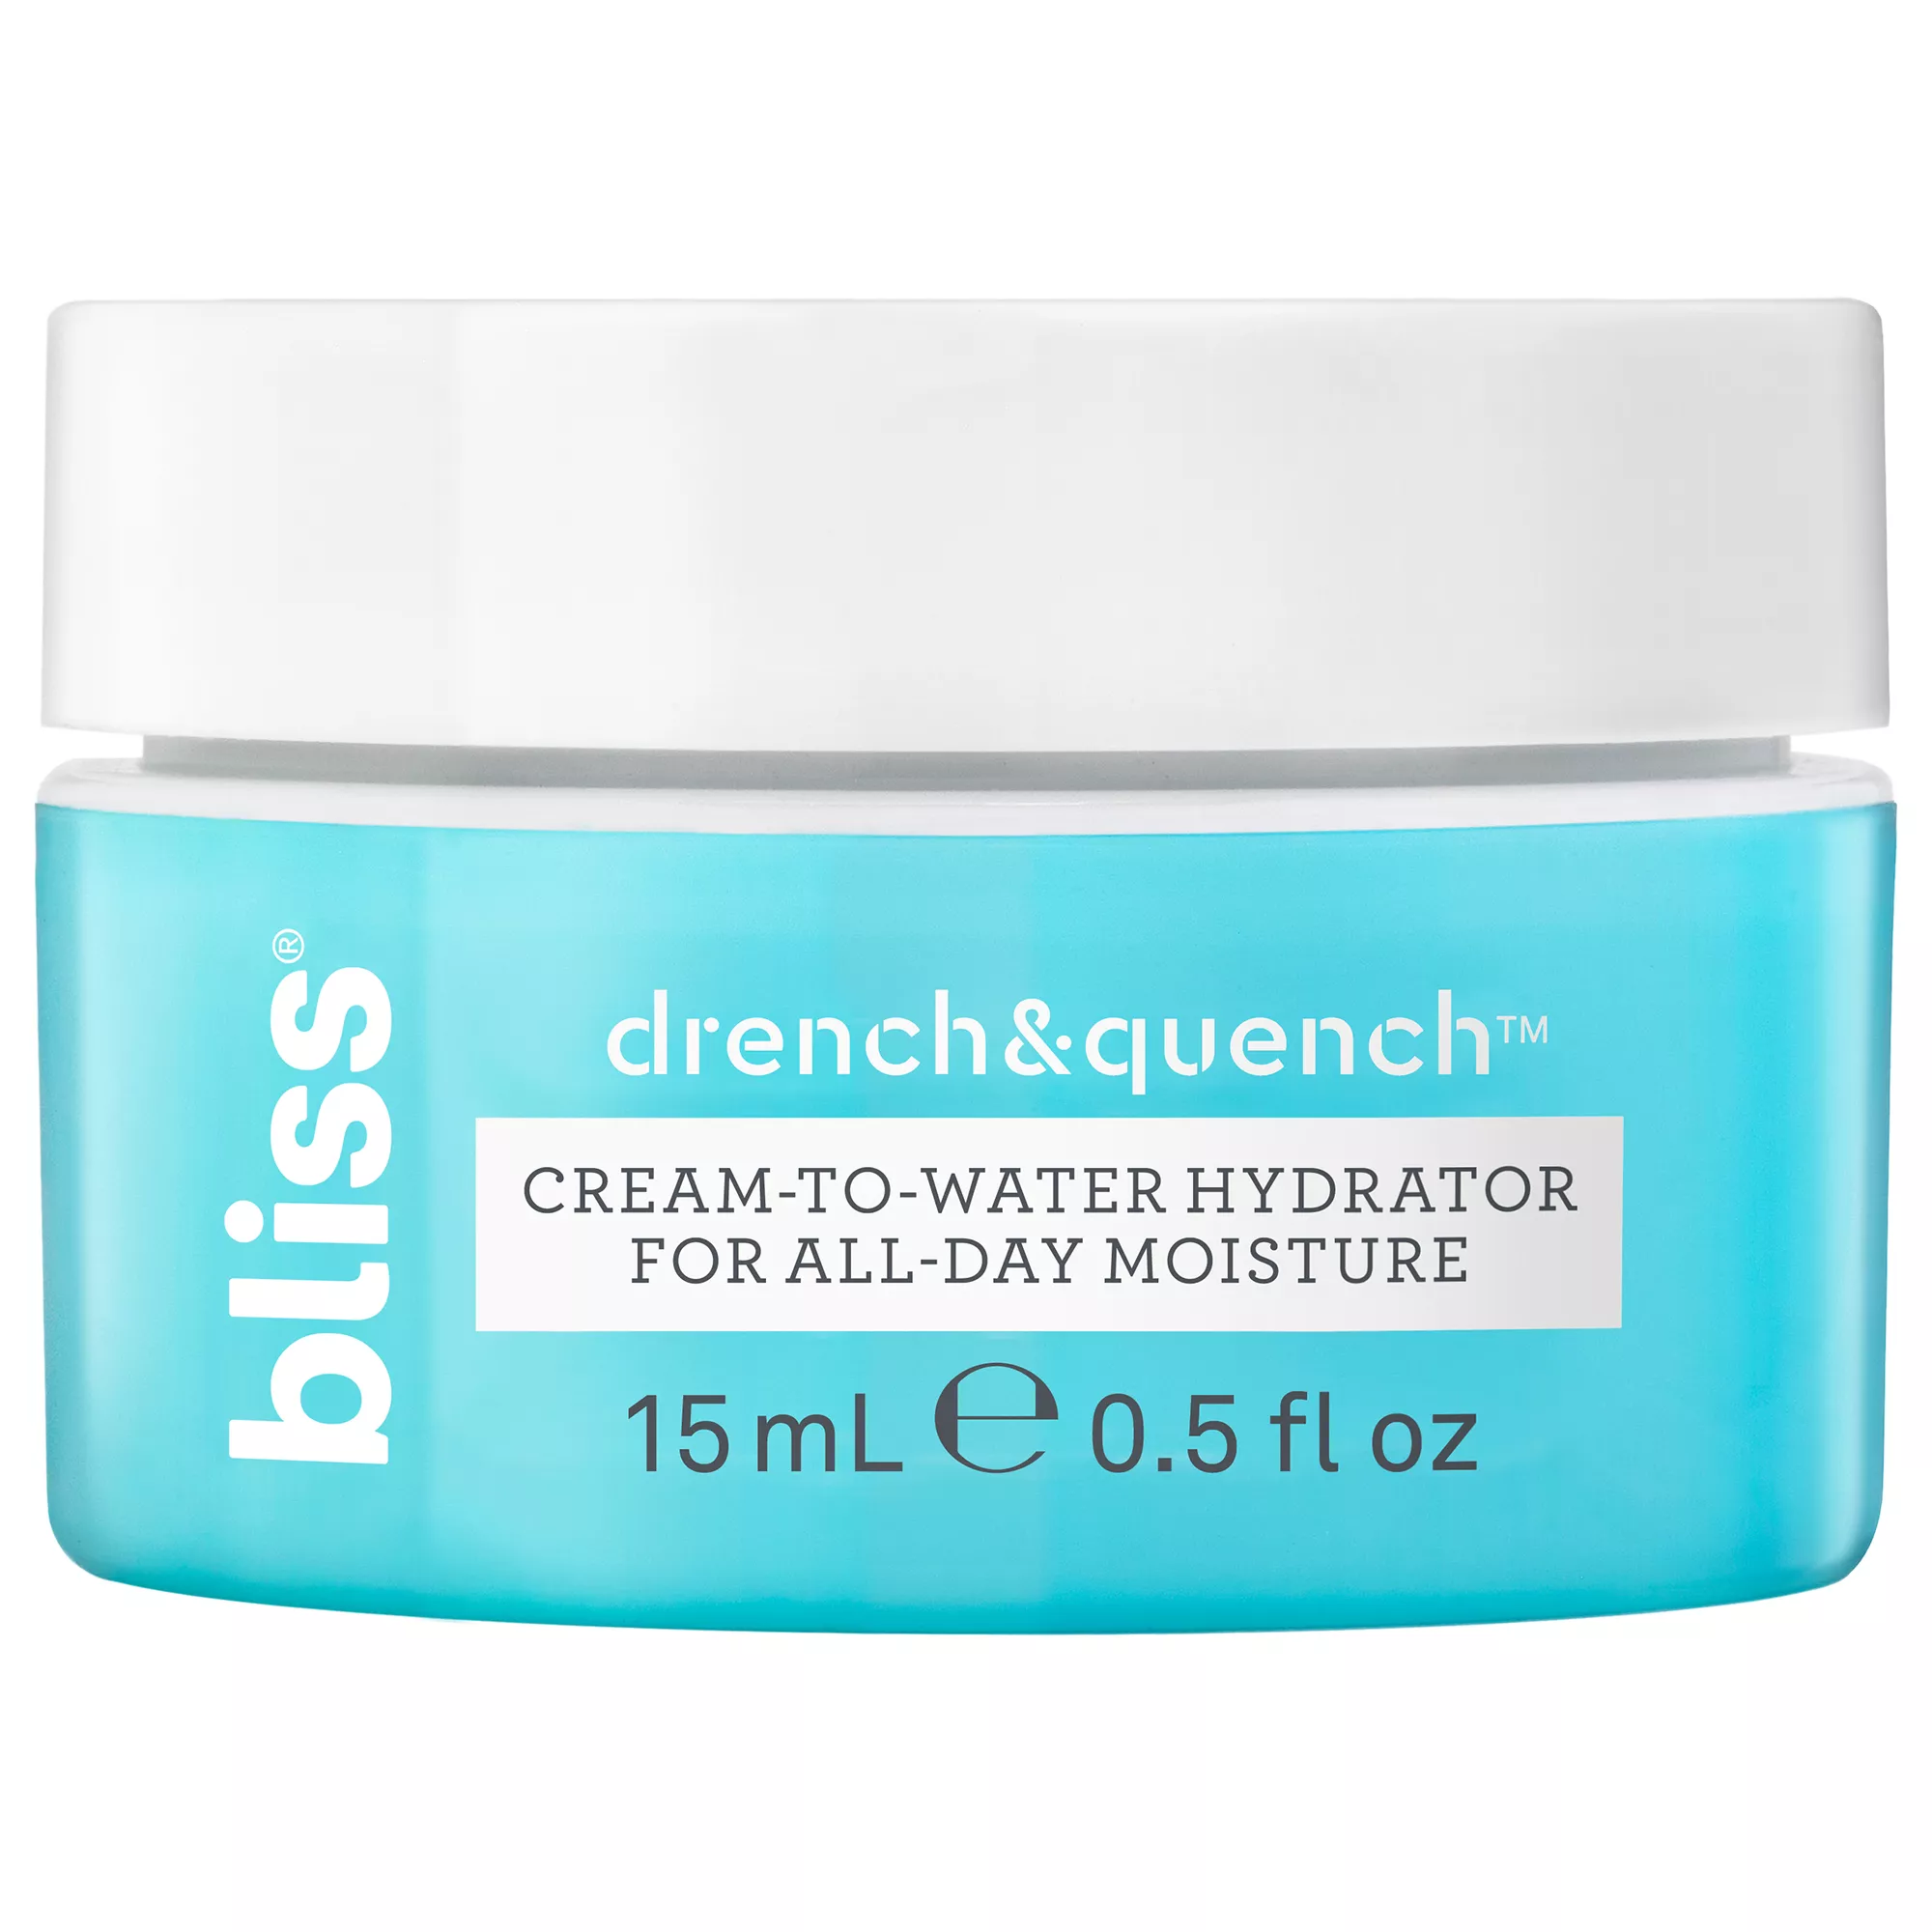 Drench & Quenchâ¯Creamâ¯Toâ¯Water Hydrator